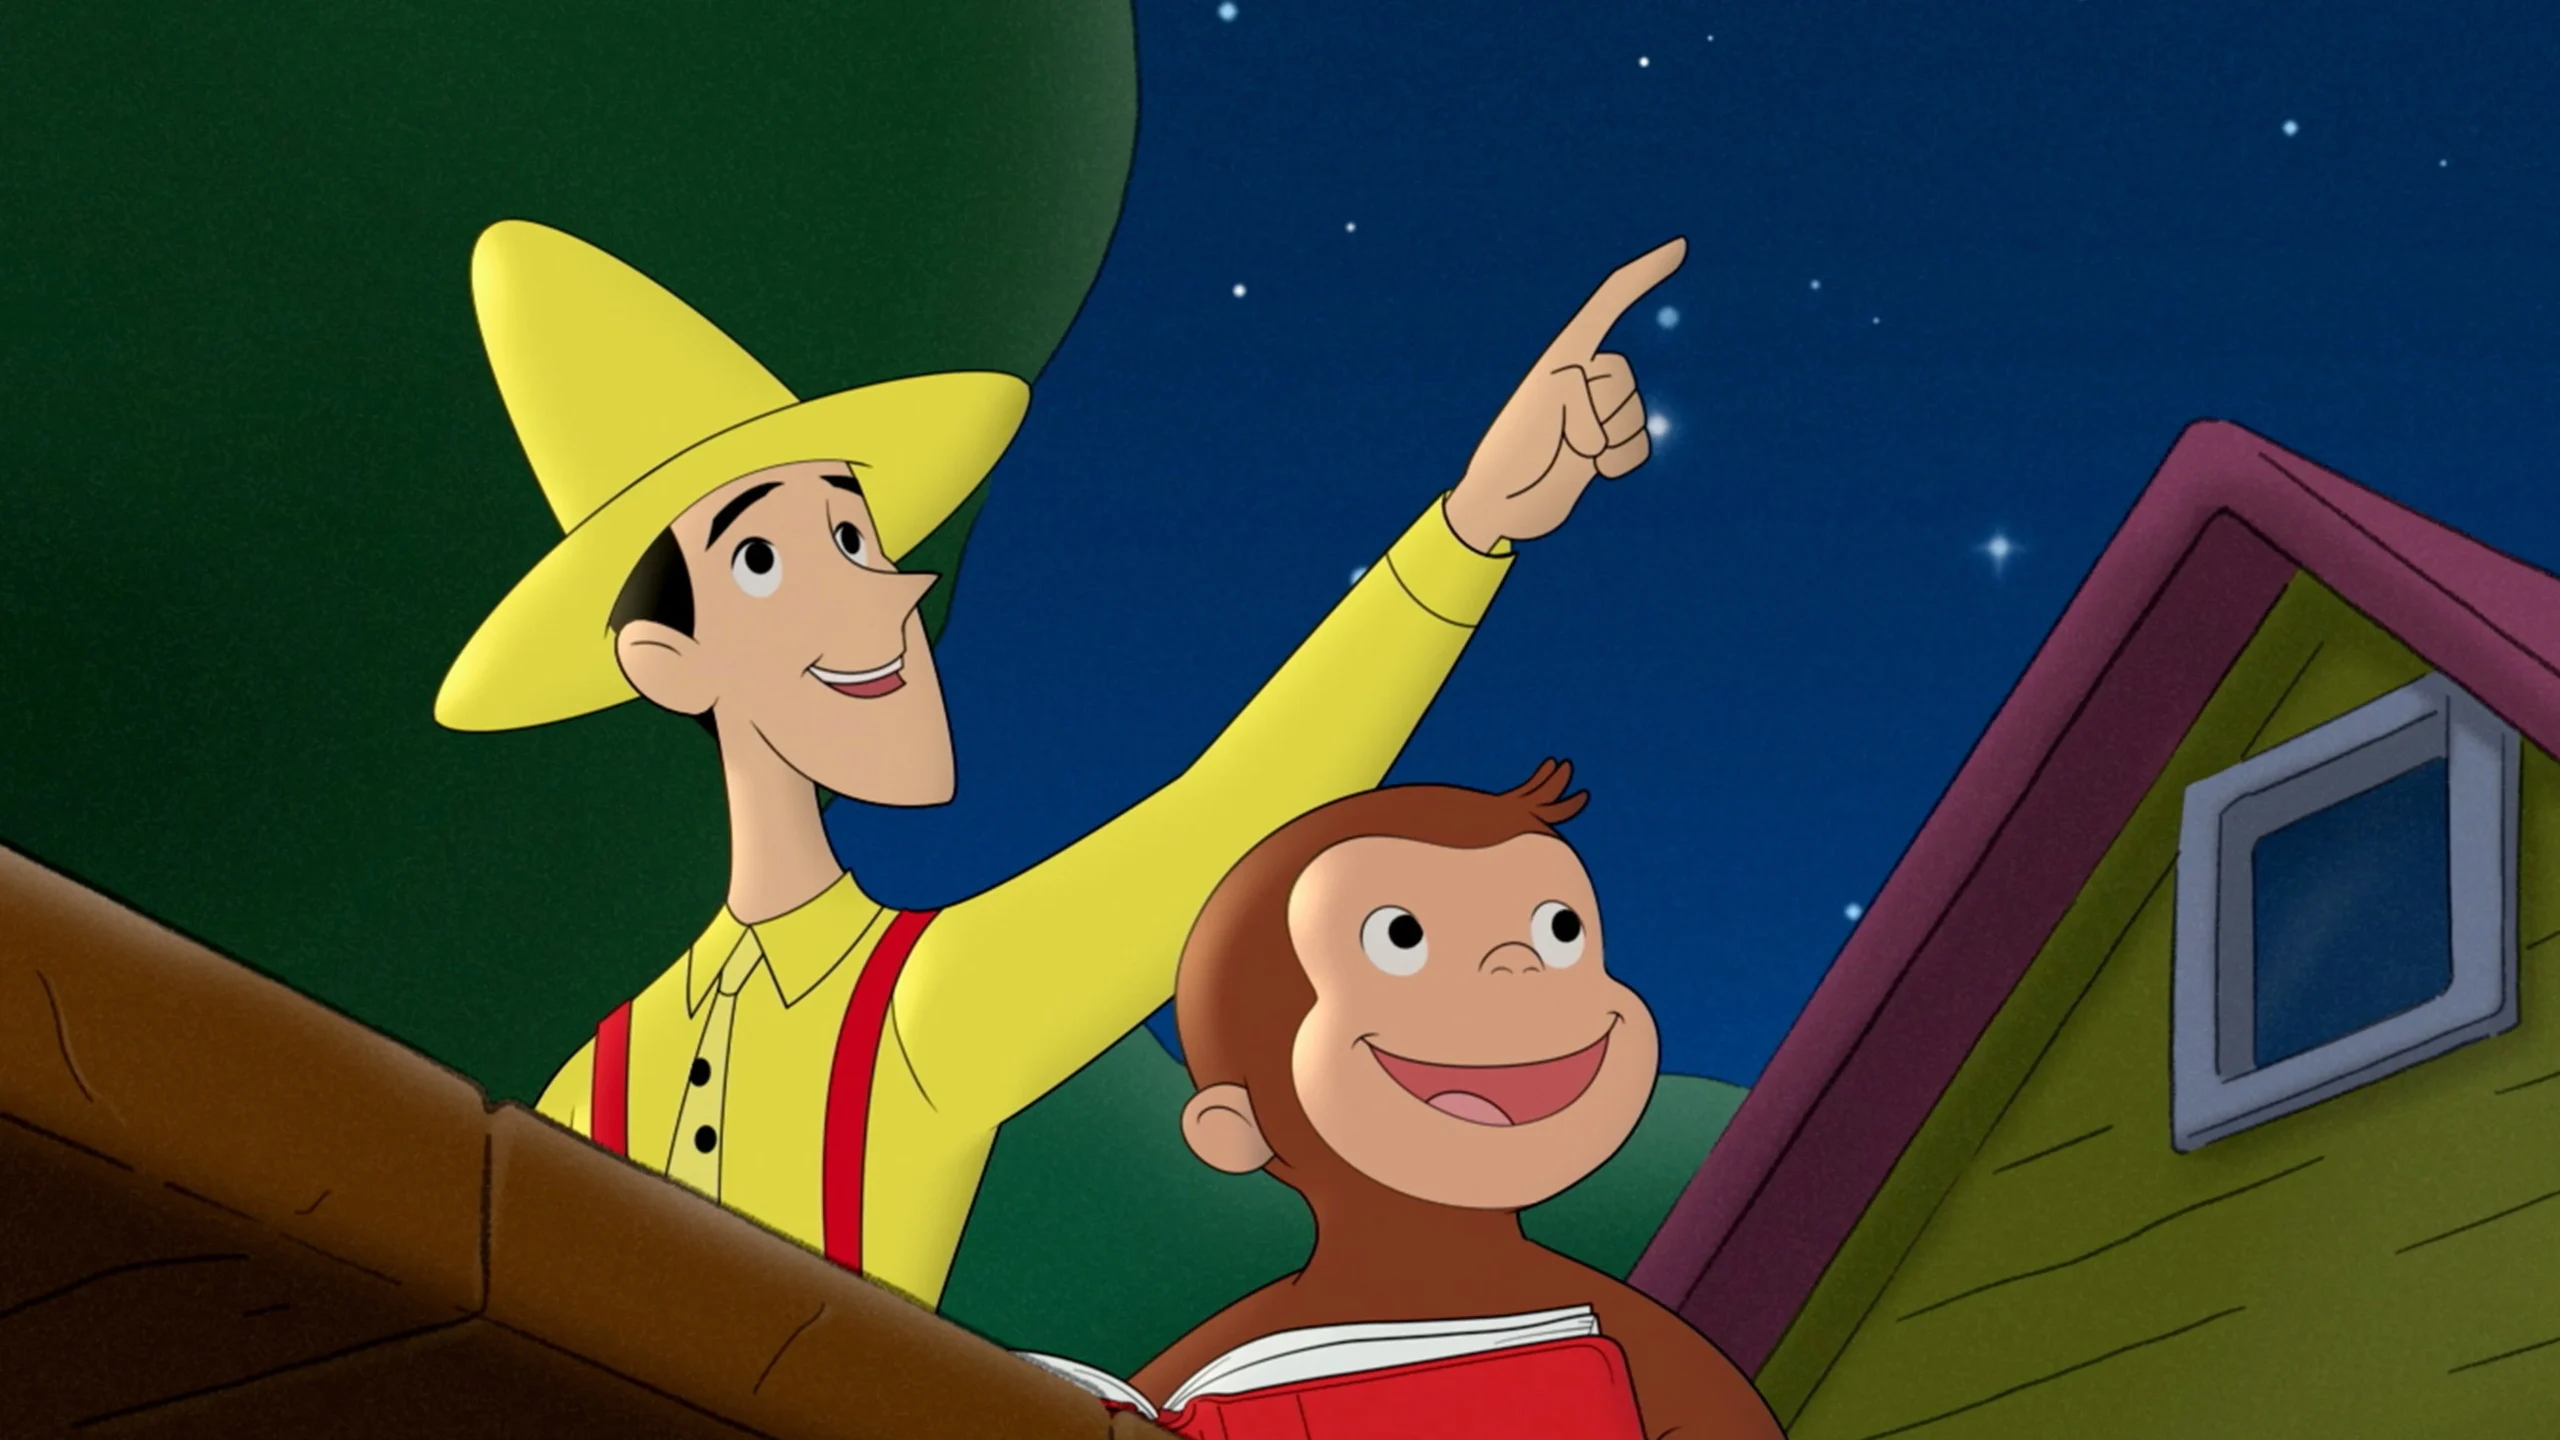 curious George and yellow hat